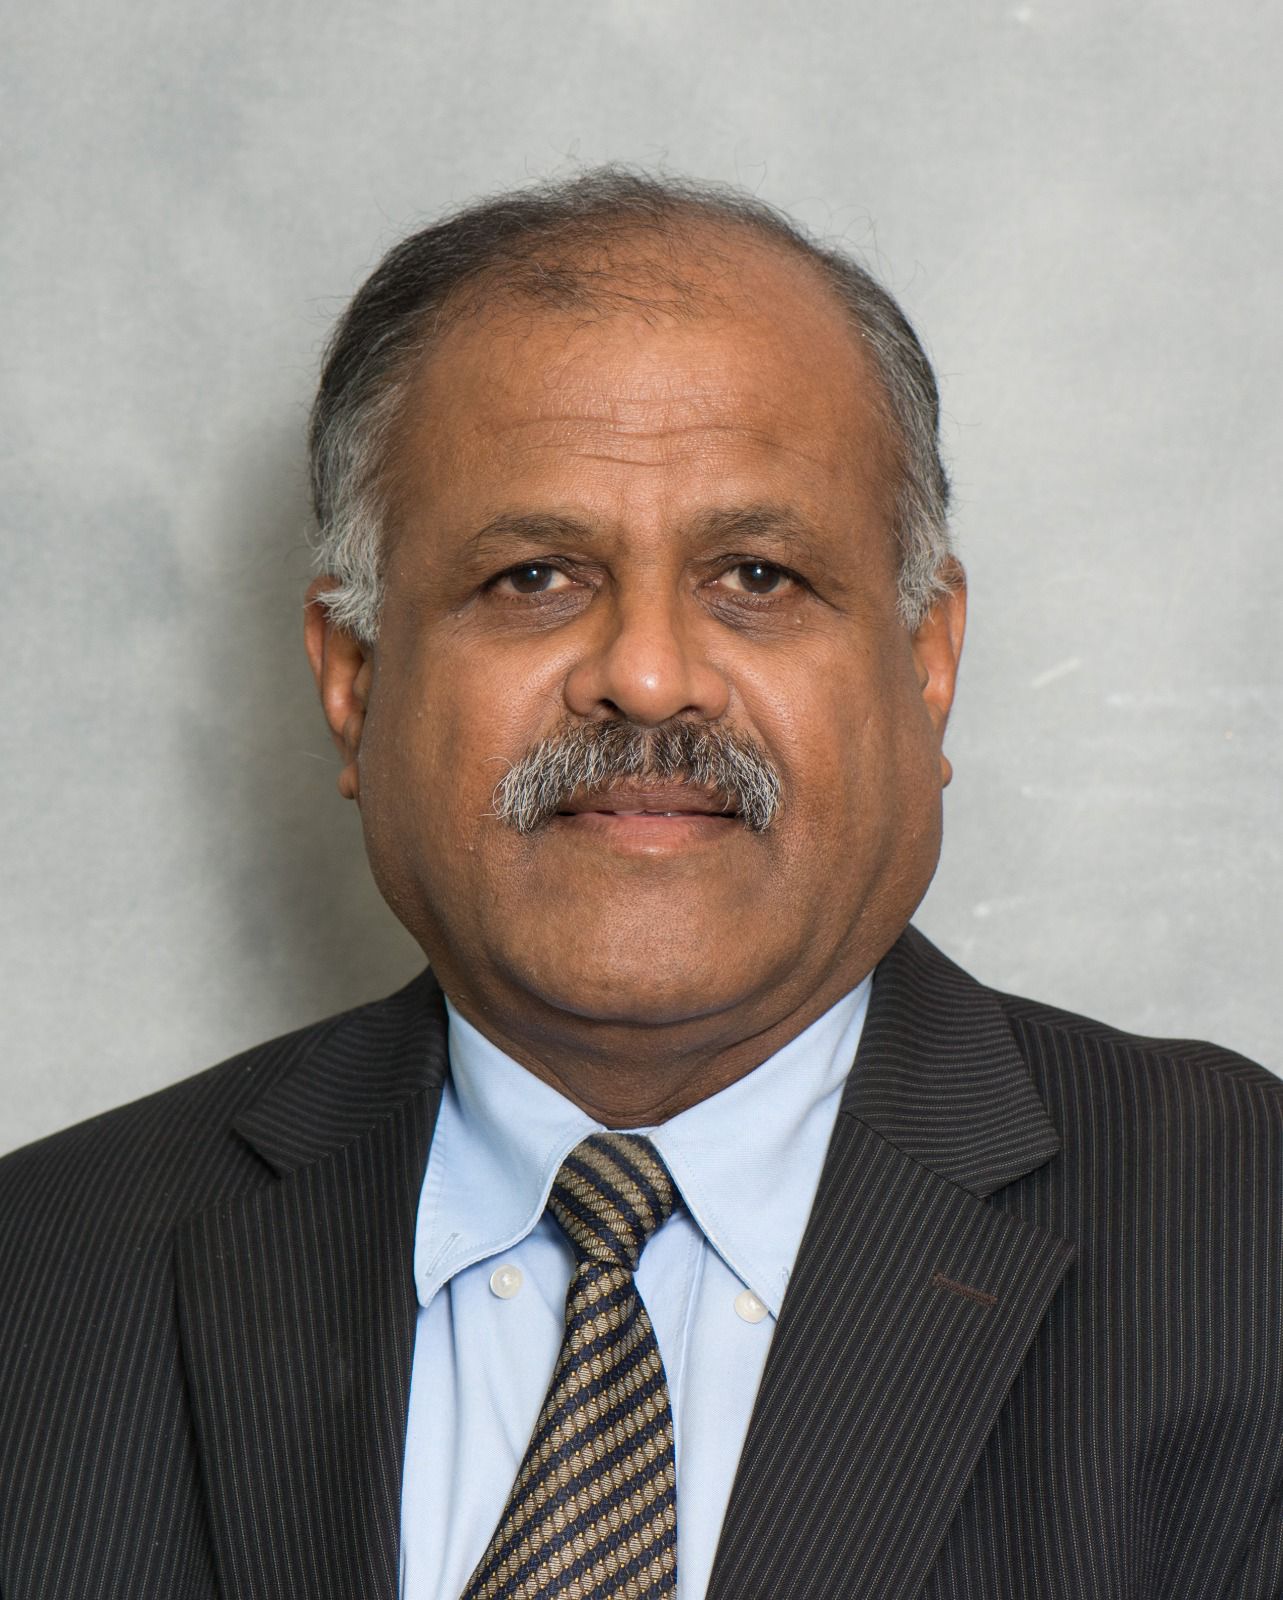 Dr. Shivakumar Anand Chikine is a Advisor for the Media and Communication committees of Mata 2020 Atlantic City